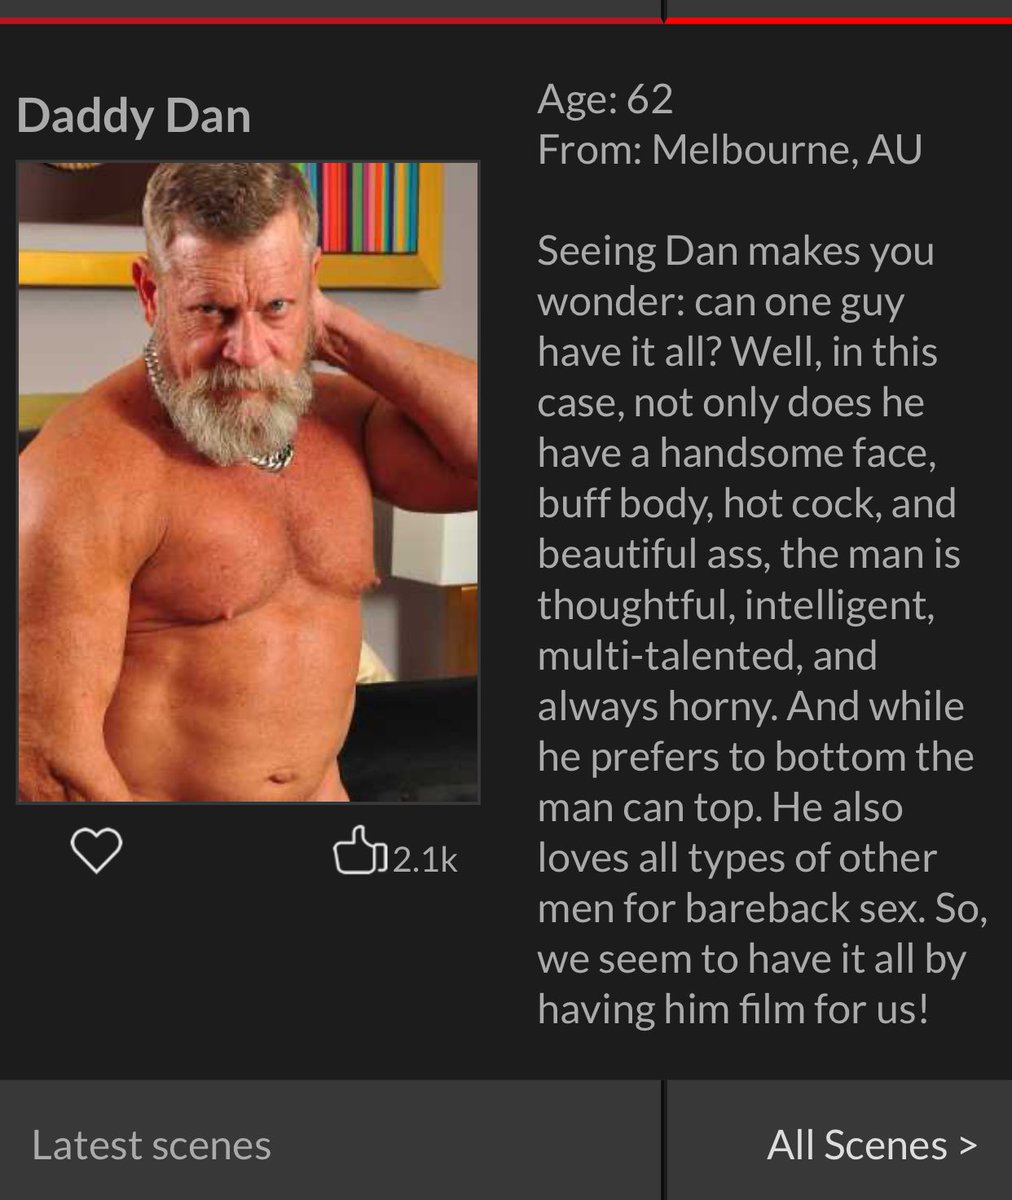 Check out older4me.com Featuring Daddy Dan and some hot men Wow this is worth subscribing too @Older4me